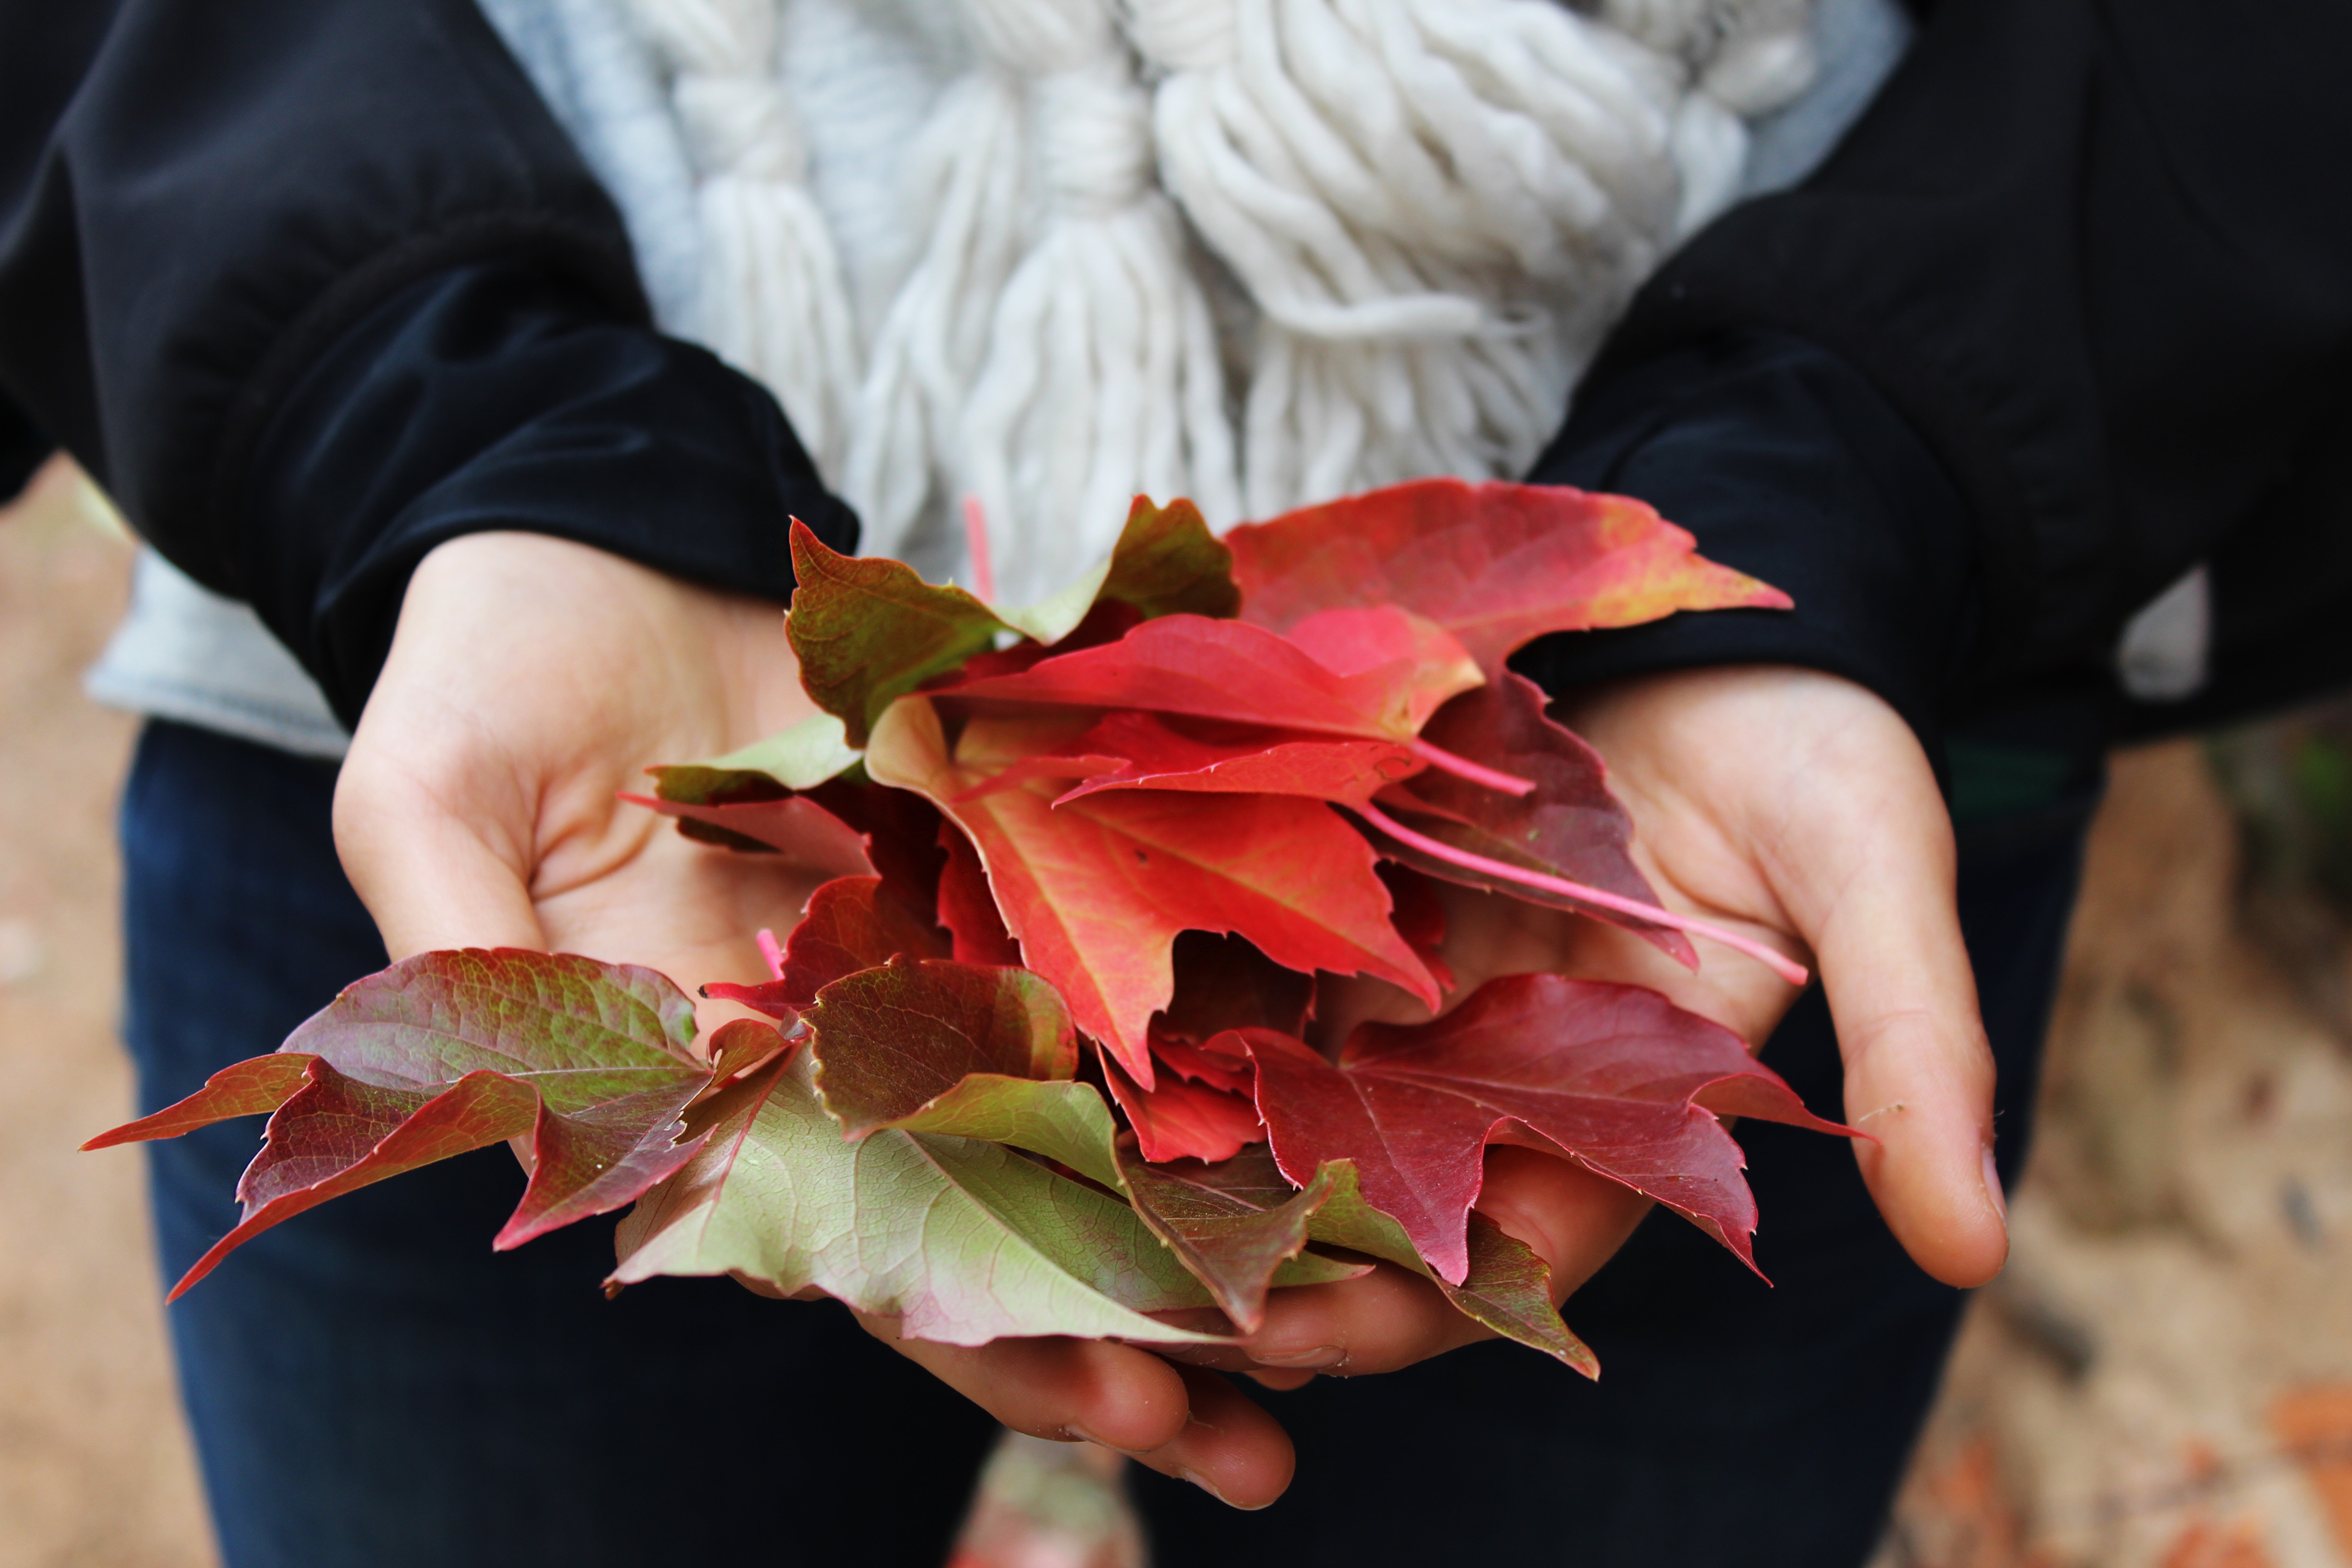 5184x3456 #leafes, #person, #Public domain image, #fall, #scarf, #hand, #girl, #red lewafe, #leafe, #red, #leaves, #palm, #autumn, #seasonal, #autuman. Mocah HD Wallpaper